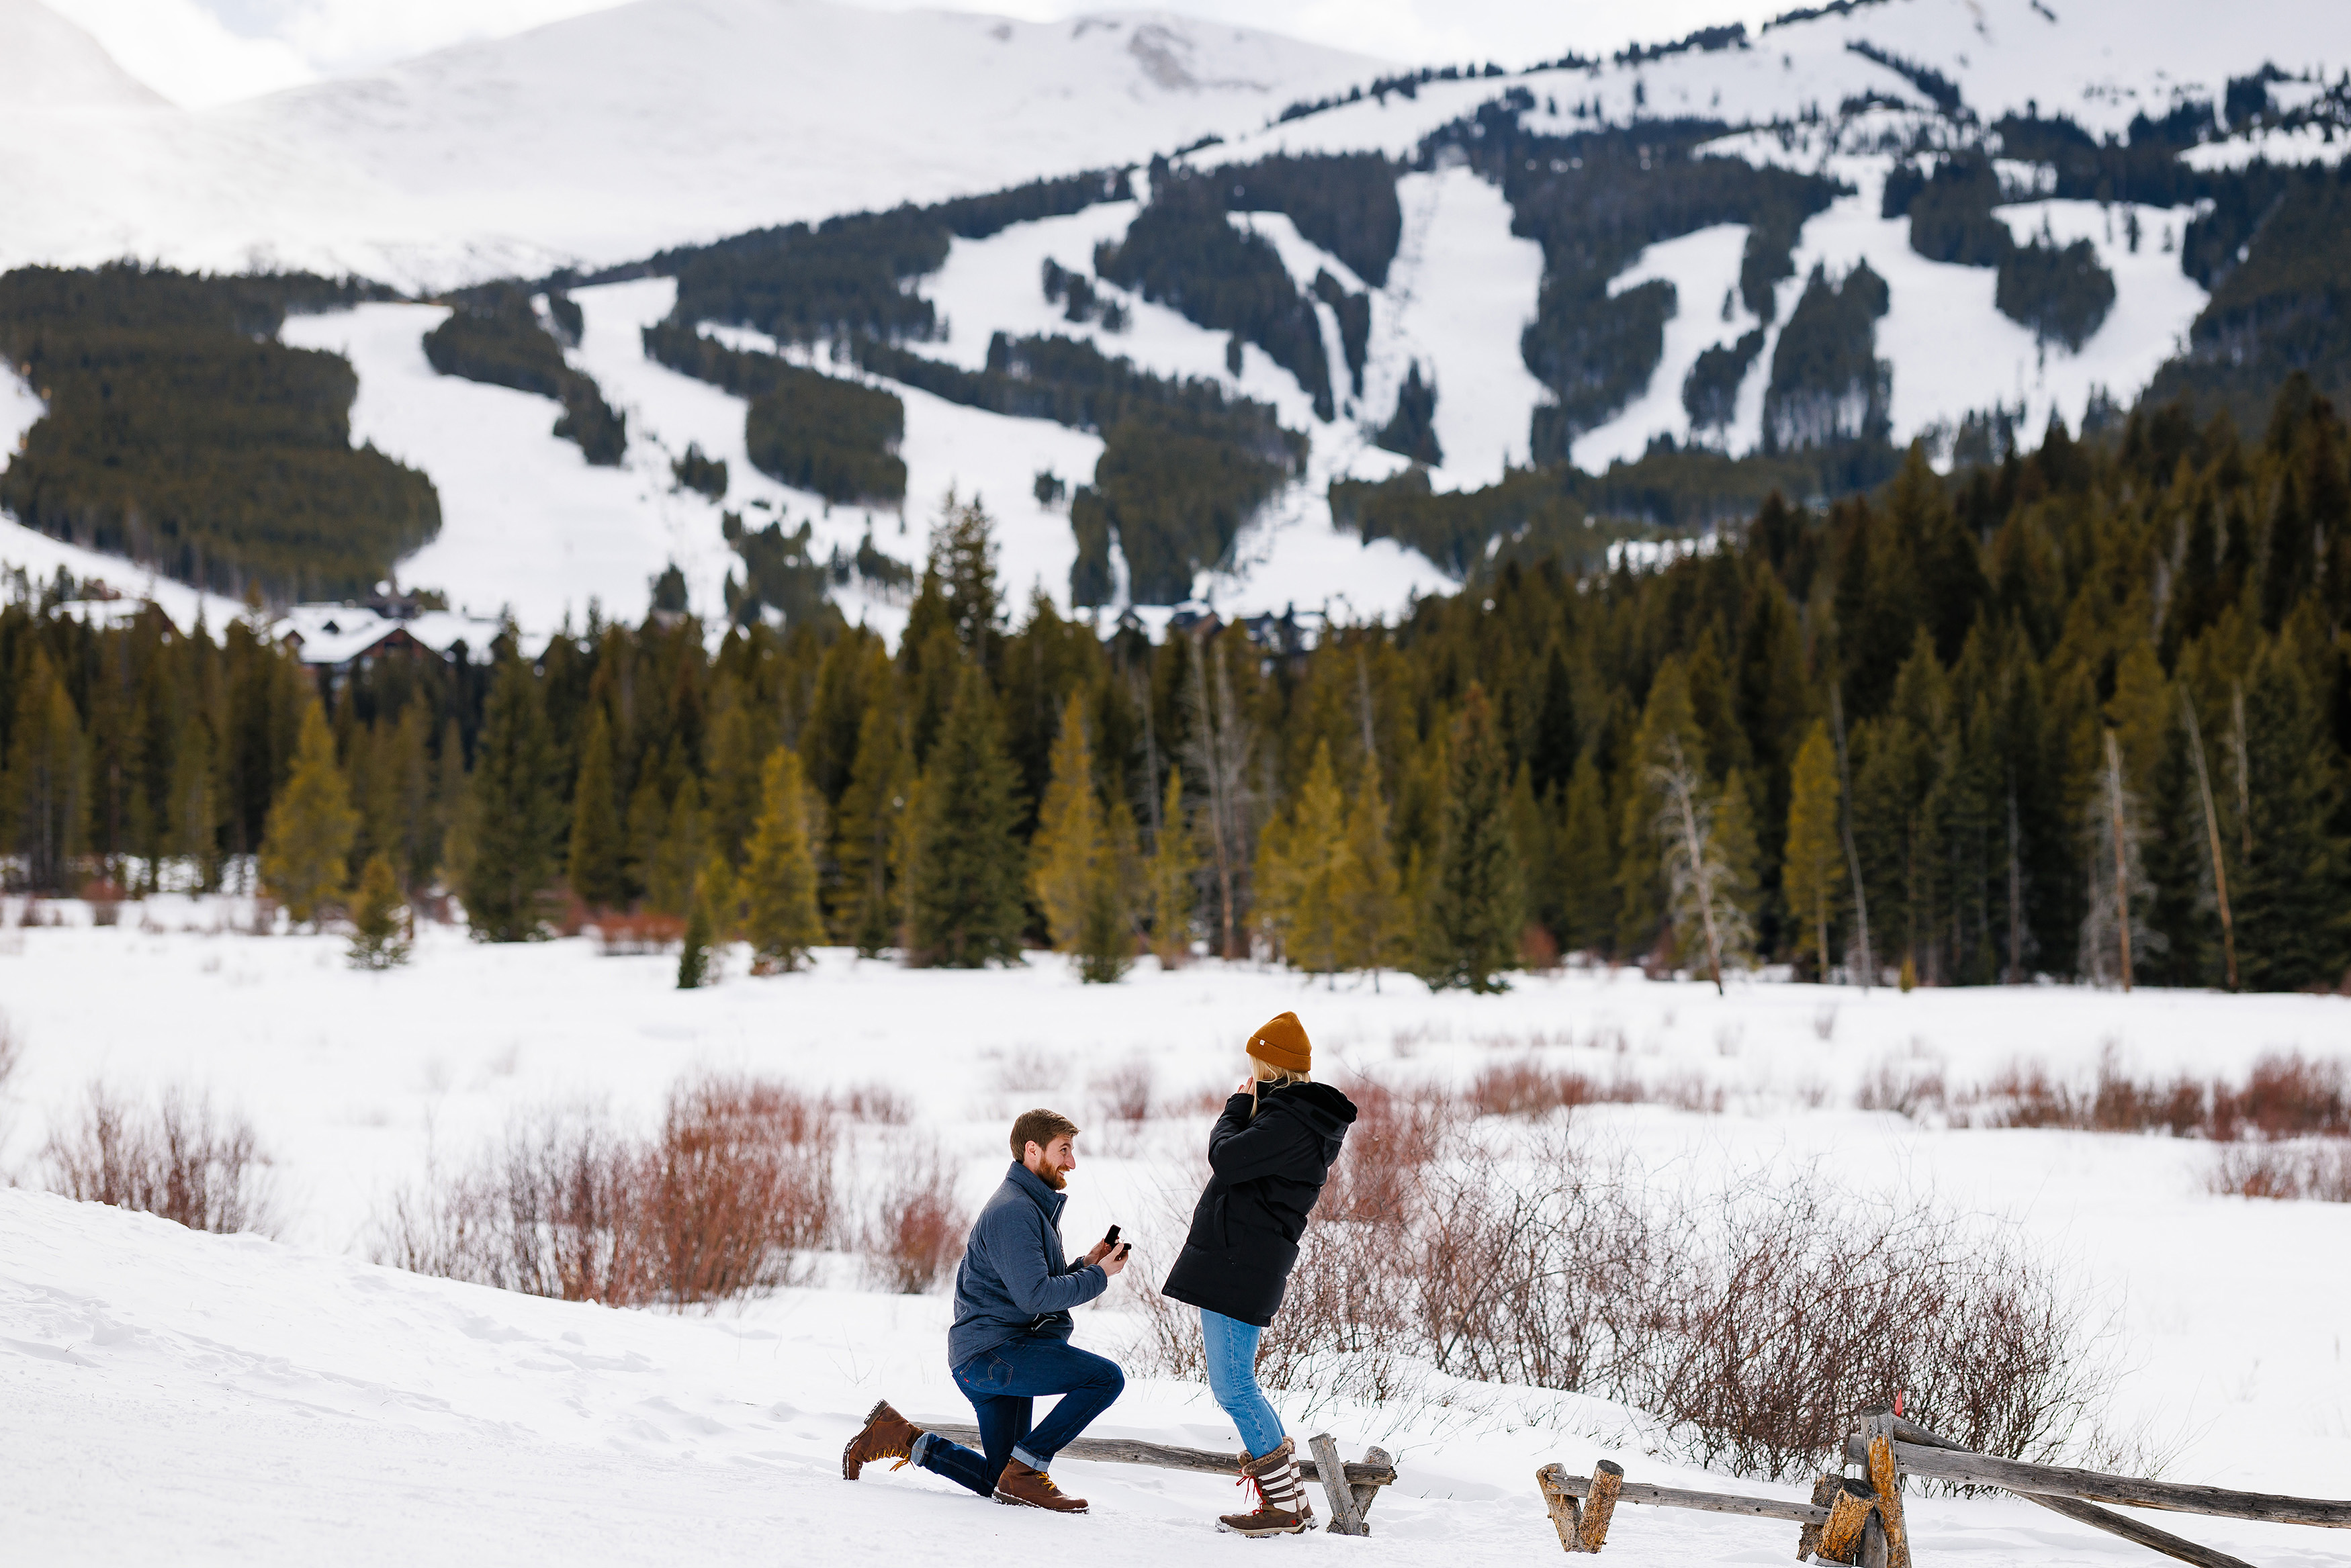 Zac on one knee as he proposes to Audrey at the Breckenridge Nordic Center.